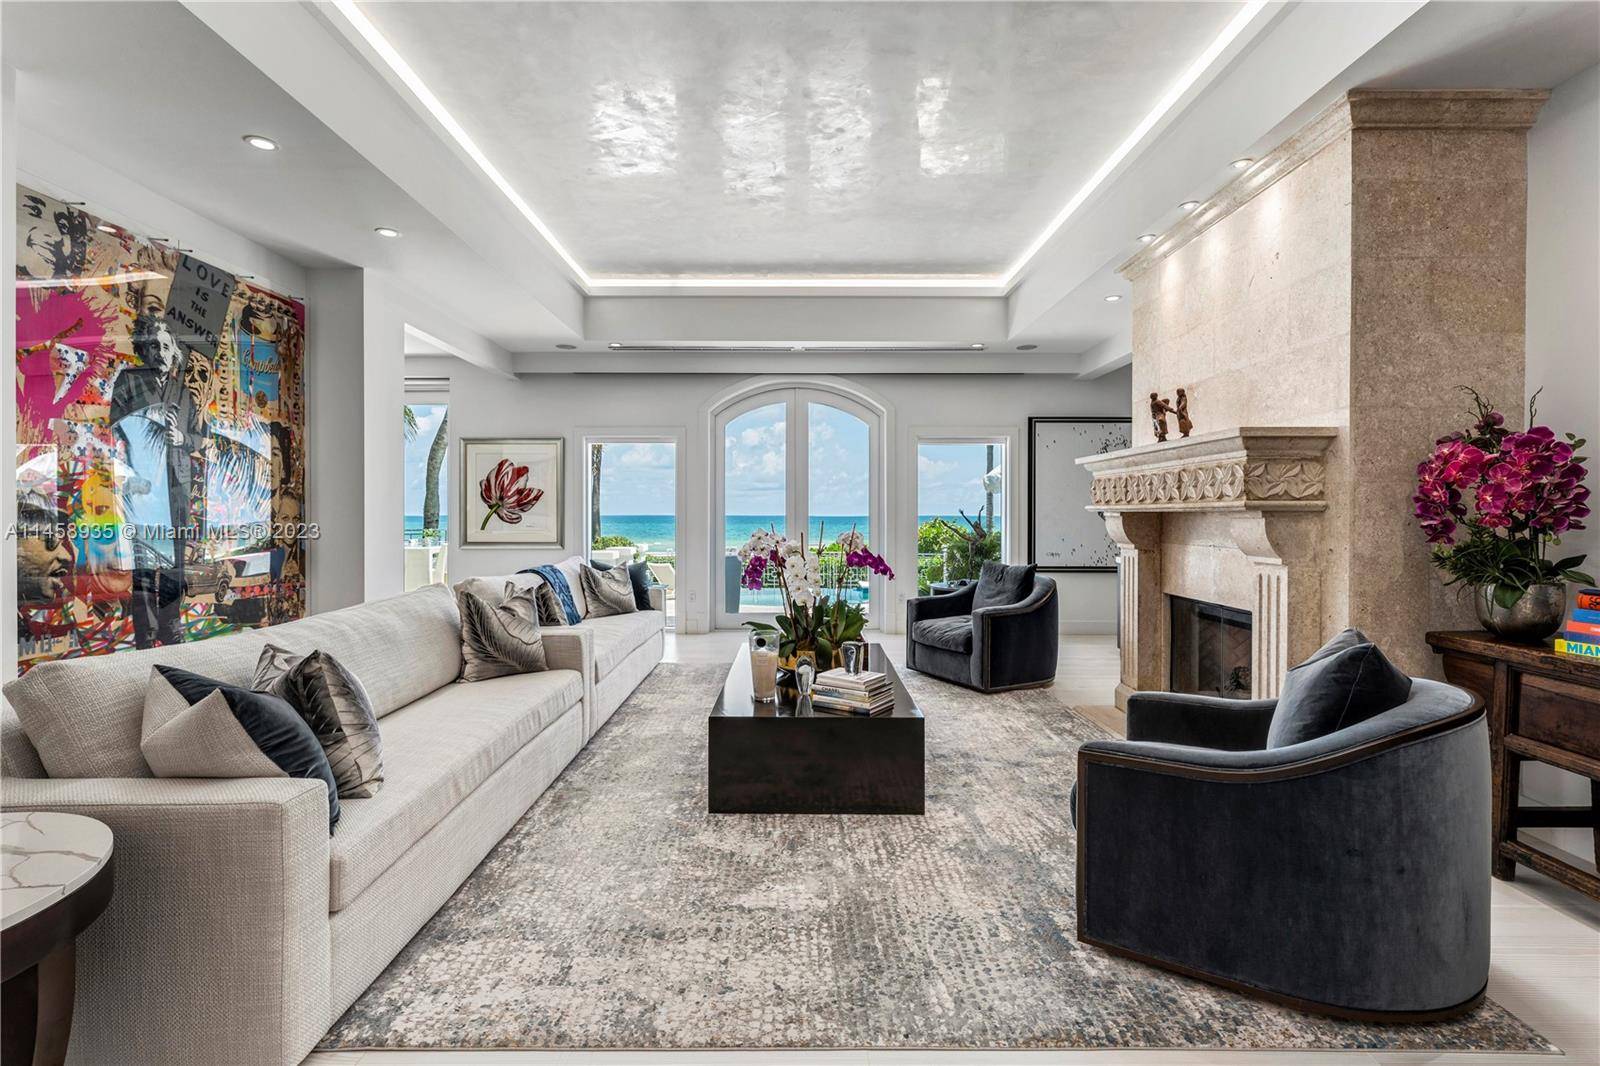 With only six Mediterranean style villas available, this is a unique opportunity to own a gem in Miami Beach, granting easy access to dining, shopping entertainment.